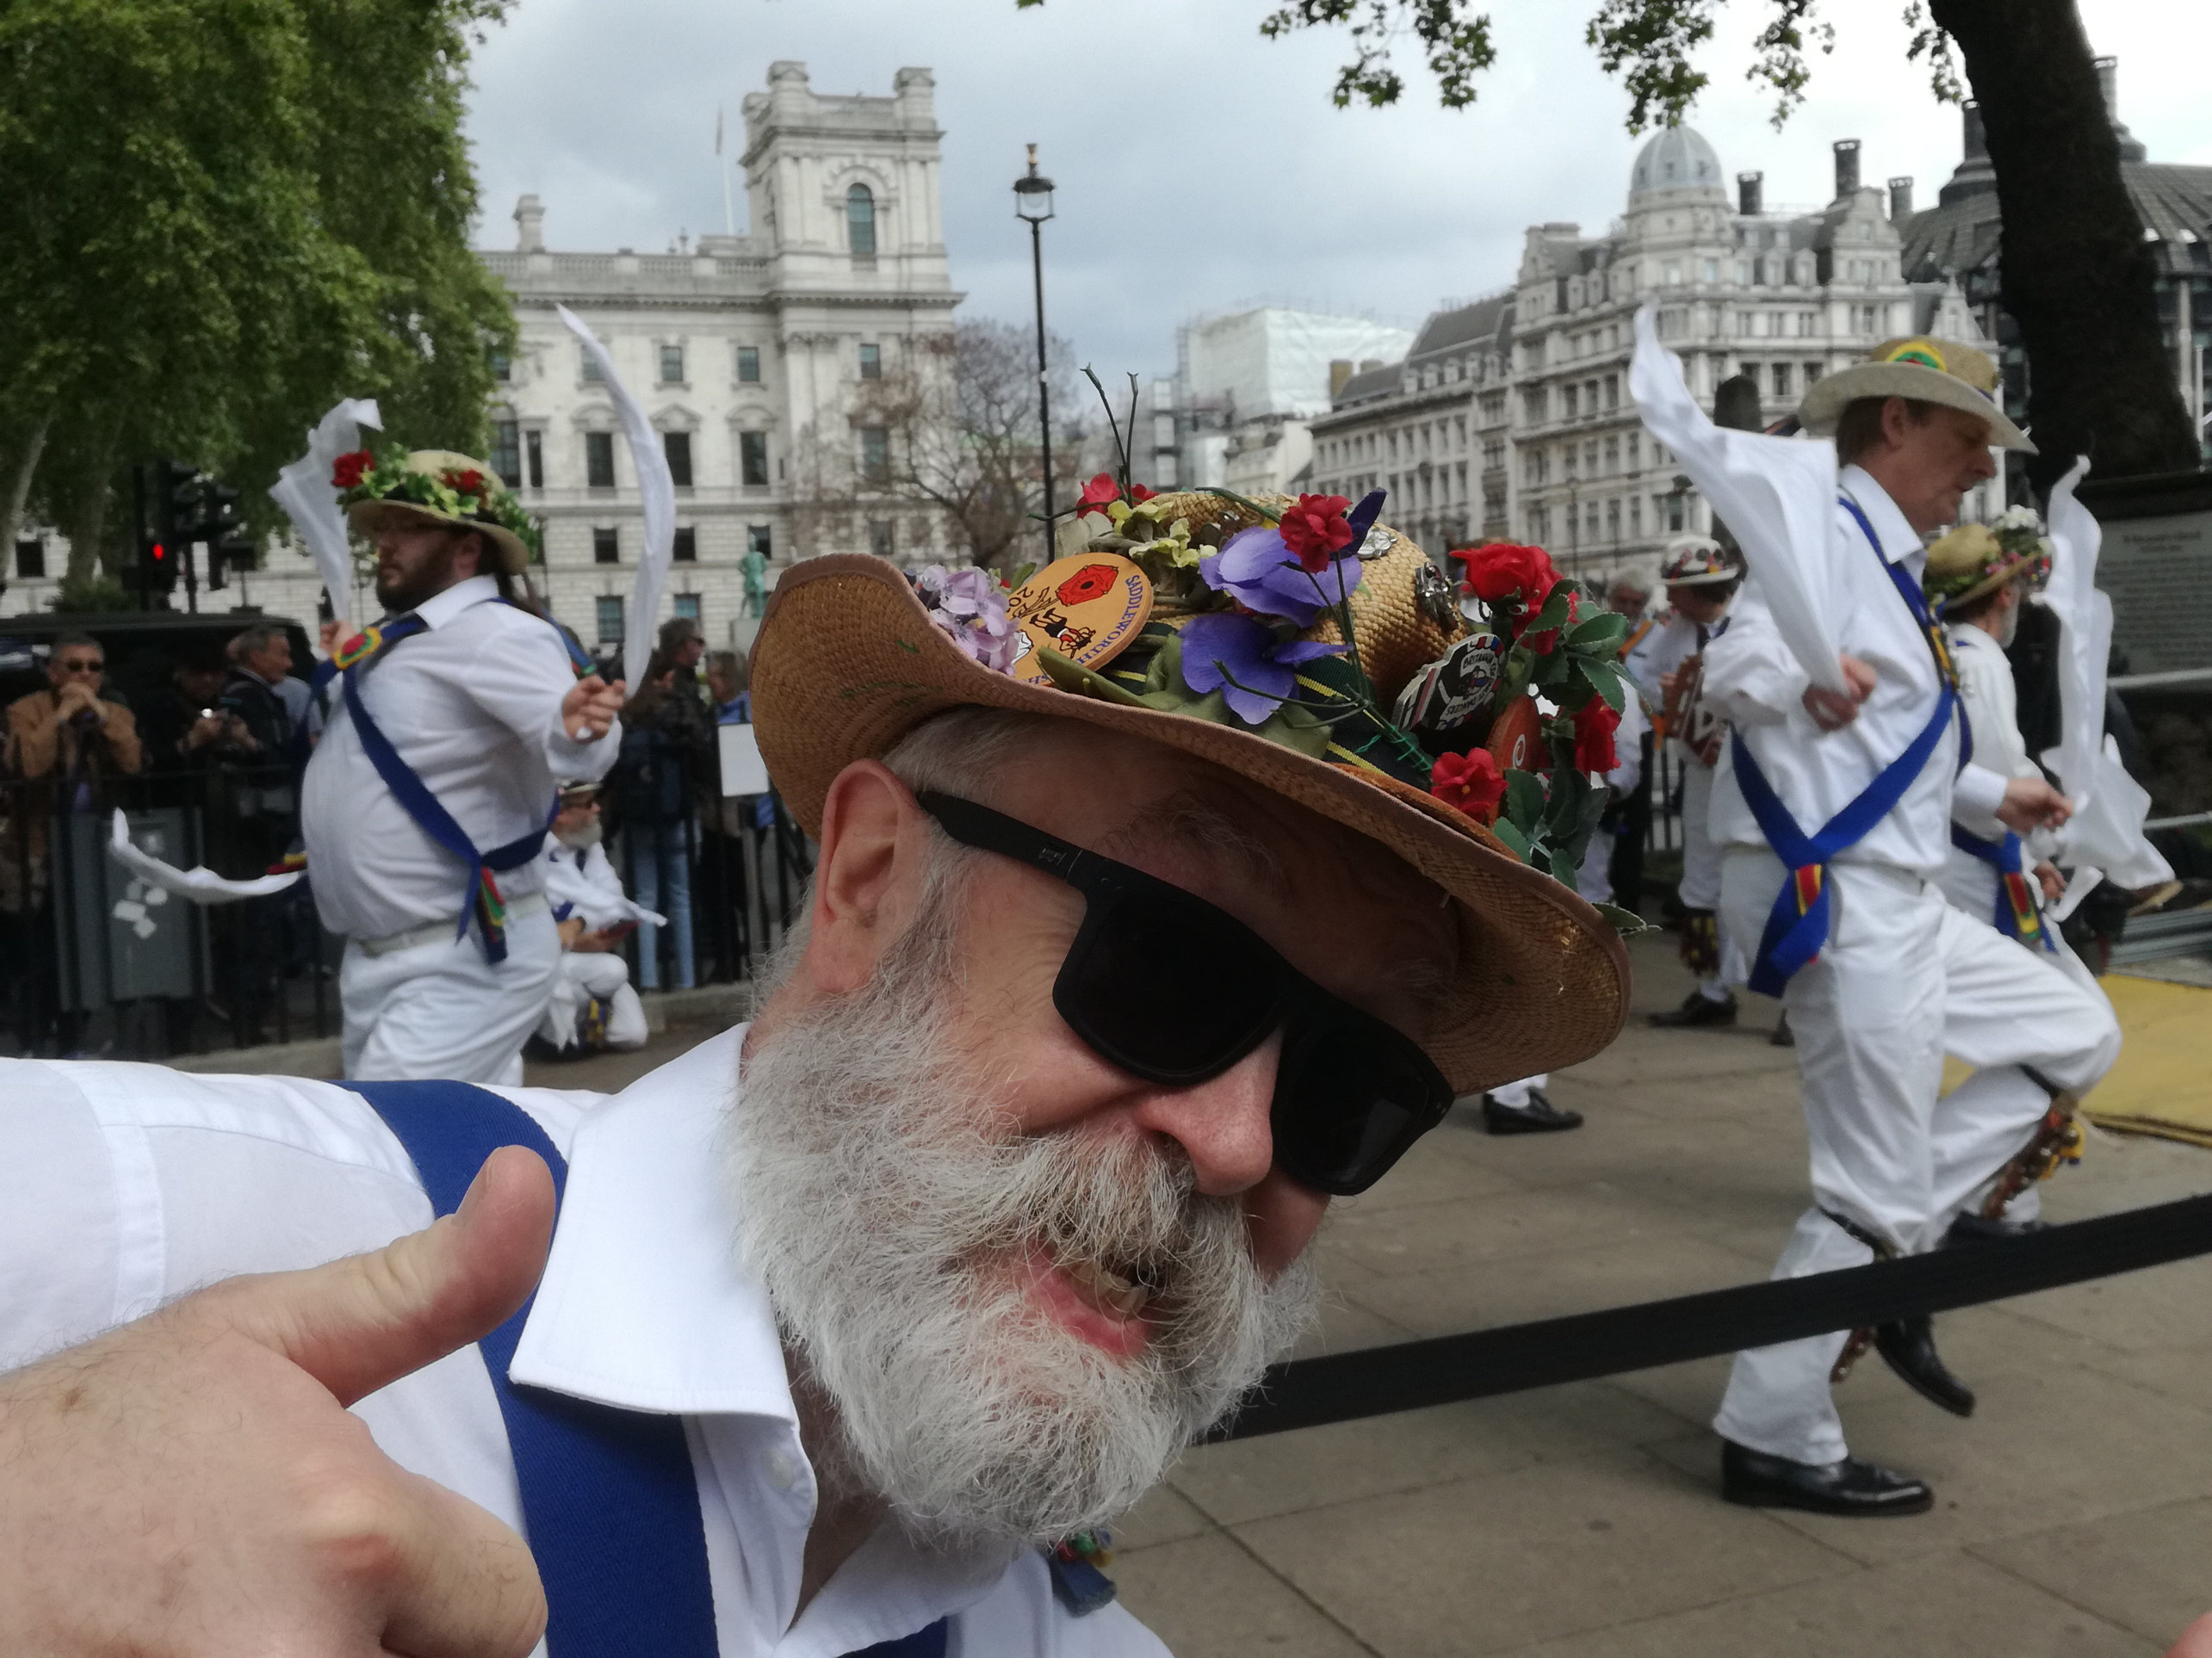 Brian on The Westminster Day of Dance 2019